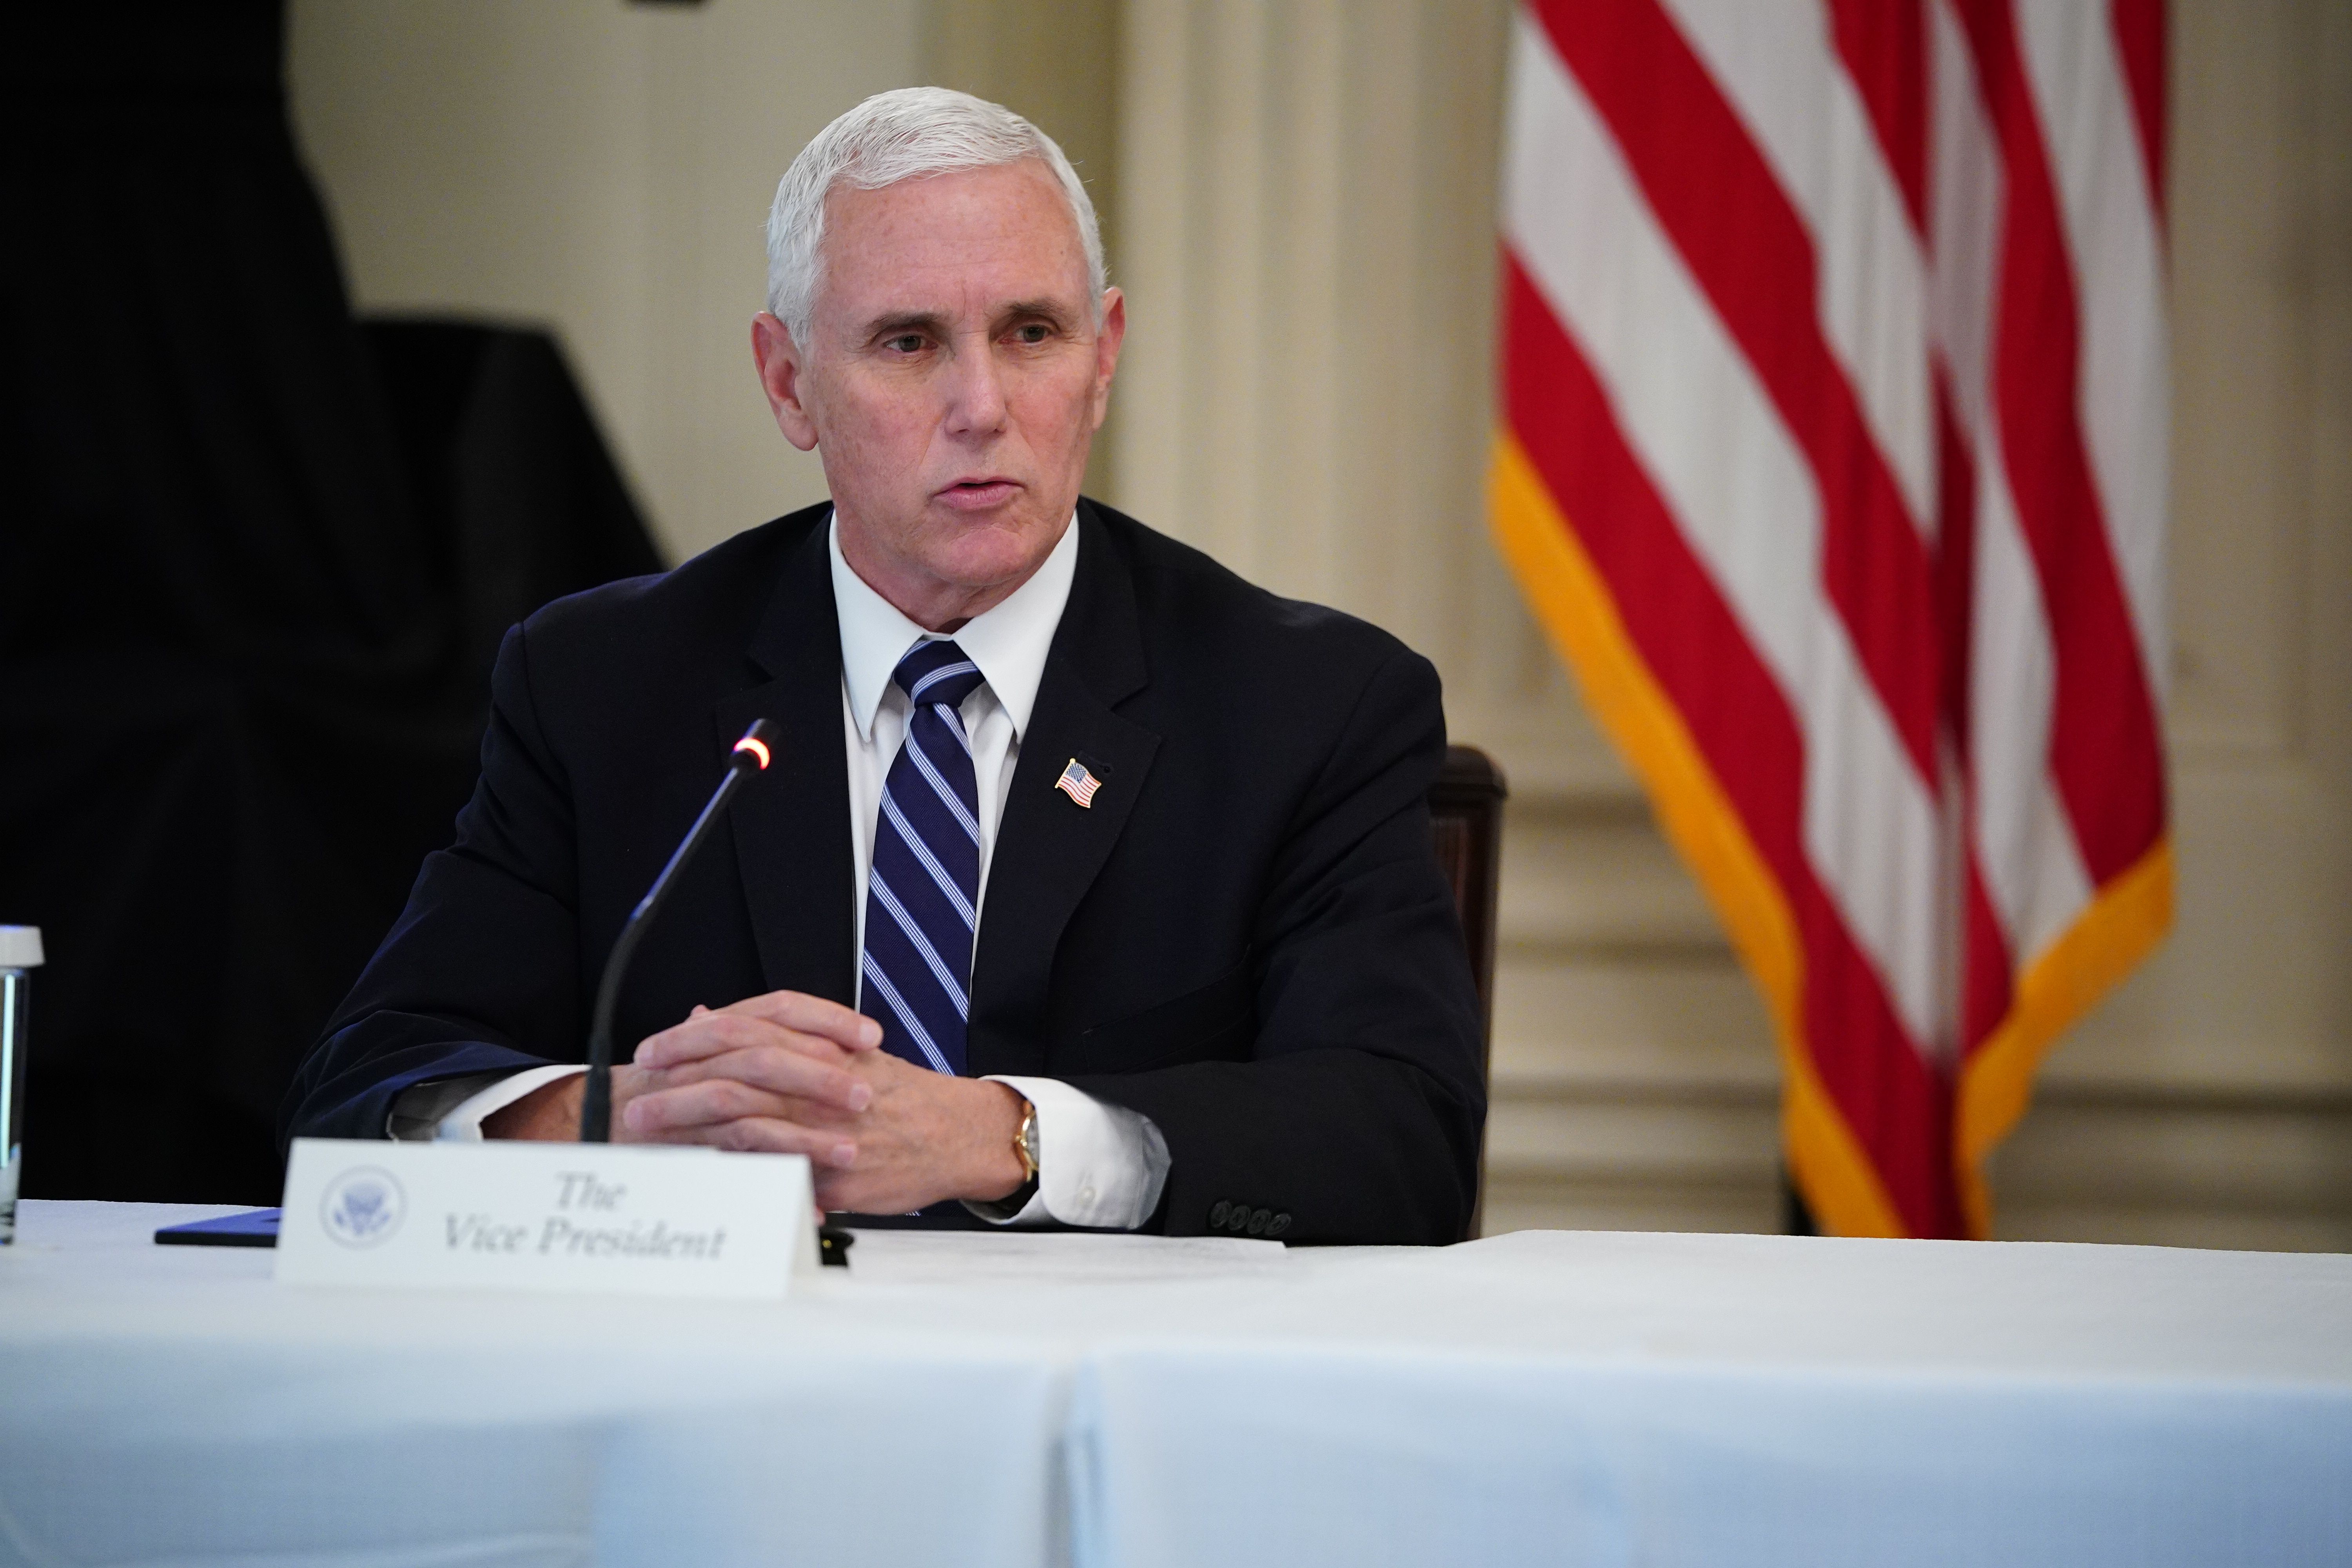 US Vice President Mike Pence speaks during a roundtable discussion with industry executives on Opening Up America Again in the State Dining Room of the White House in Washington, DC on April 29, 2020 (Photo by MANDEL NGAN/AFP via Getty Images)